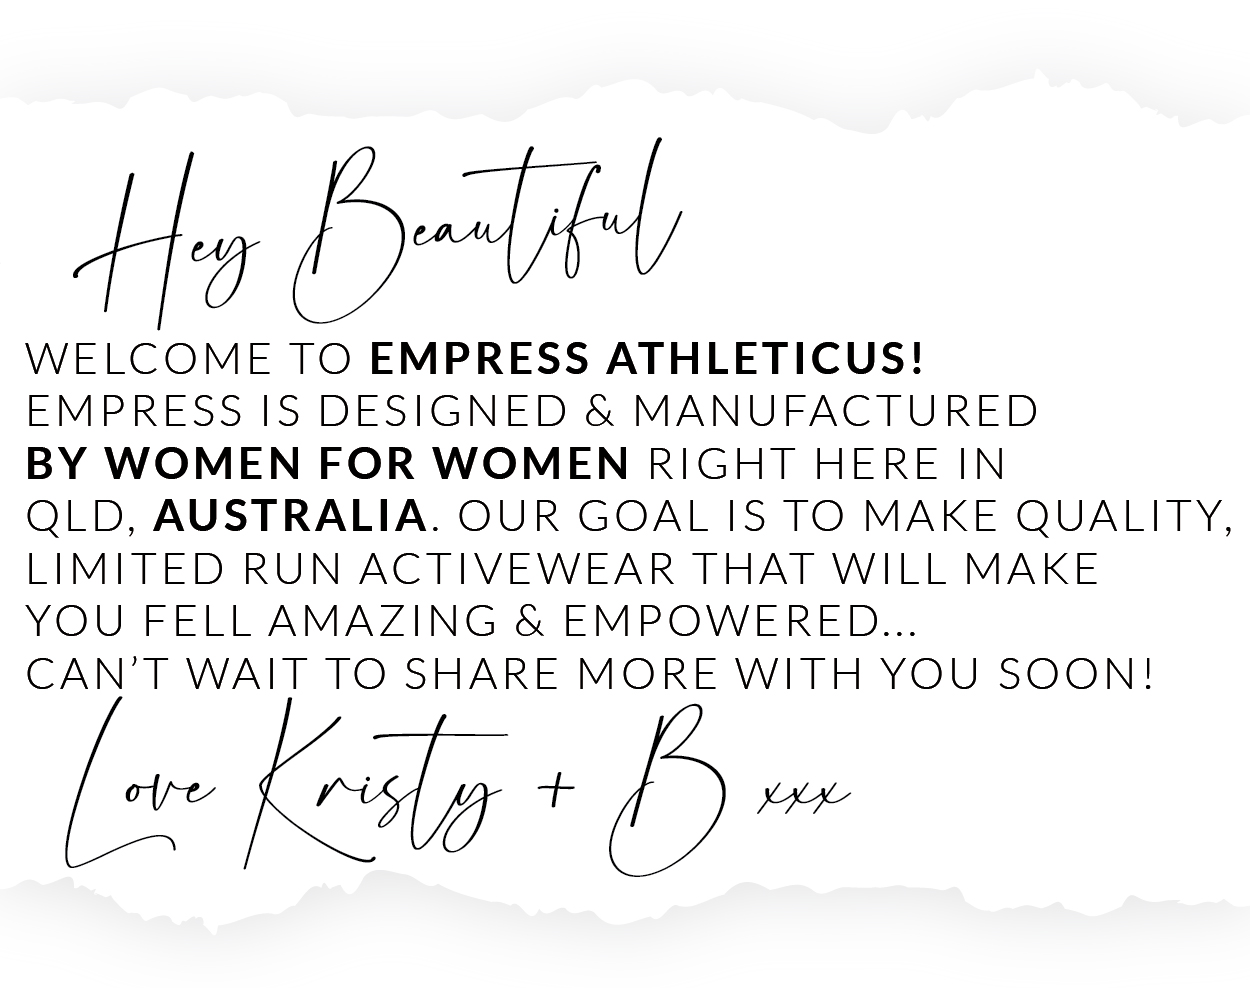 Ha DR WELCOME TO EMPRESS ATHLETICUS! EMPRESS IS DESIGNED MANUFACTURED BY WOMEN FOR WOMEN RIGHT HERE IN QLD, AUSTRALIA. OUR GOAL IS TO MAKE QUALITY, LIMITED RUN ACTIVEWEAR THAT WILL MAKE YOU FELL AMAZING EMPOWERED... CAN'T WAIT TO SHARE MORE WITH YOU SOON! ey 5 